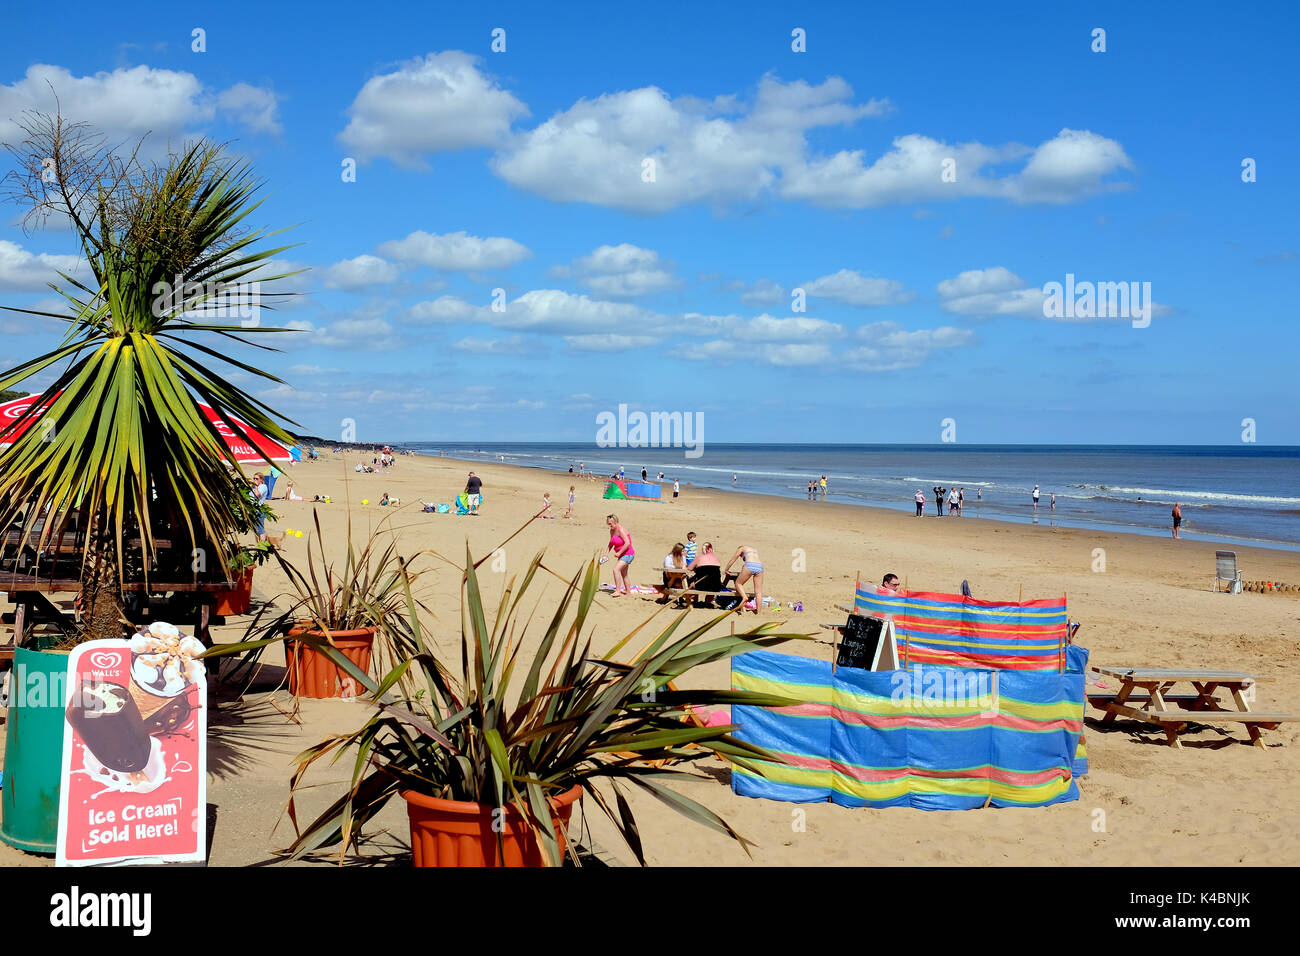 Mablethorpe, Lincolnshire, UK. August 15, 2017. Tourists and holidaymakers enjoying the sea and sands on the North beach at Mablethorpe in Lincolnshir Stock Photo